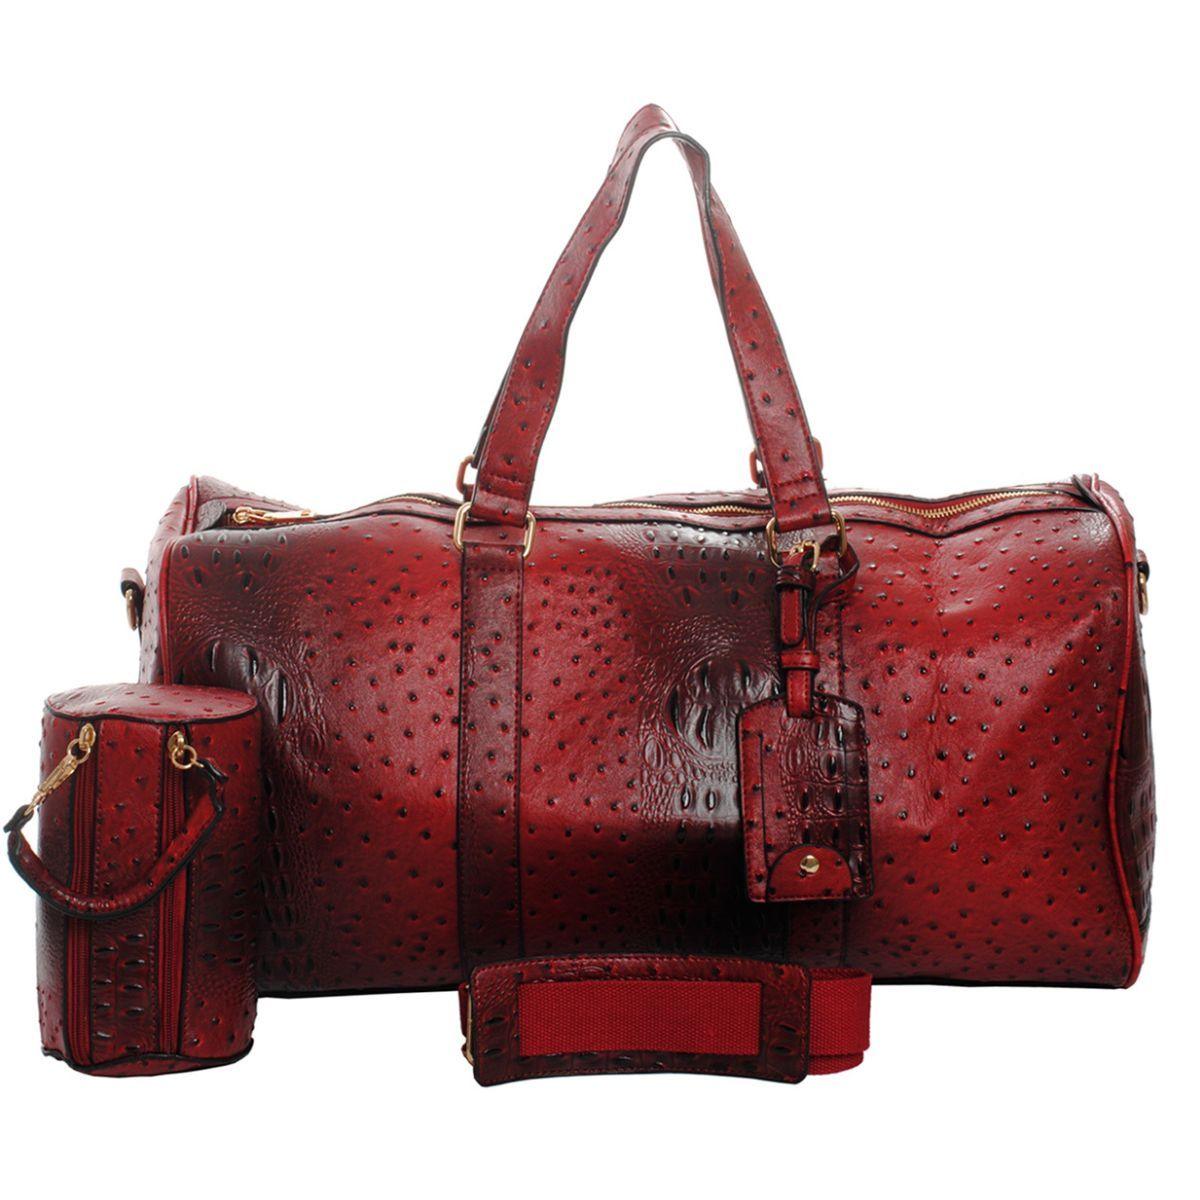 Make a Fashion Statement with Women's Red Duffle Bag Set